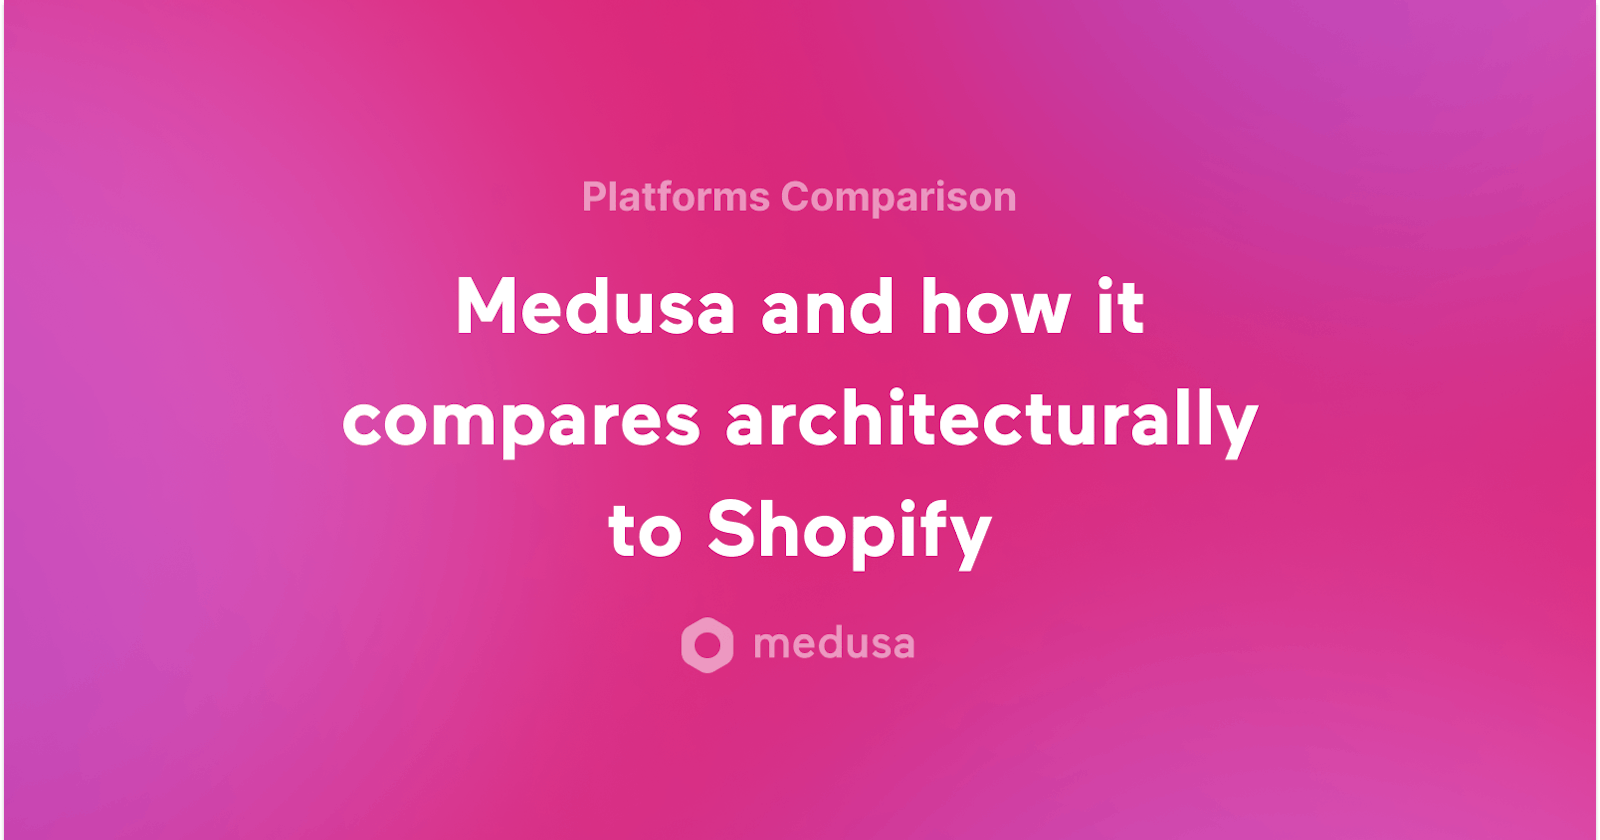 A Comparison Between Shopify and its Open Source Alternative